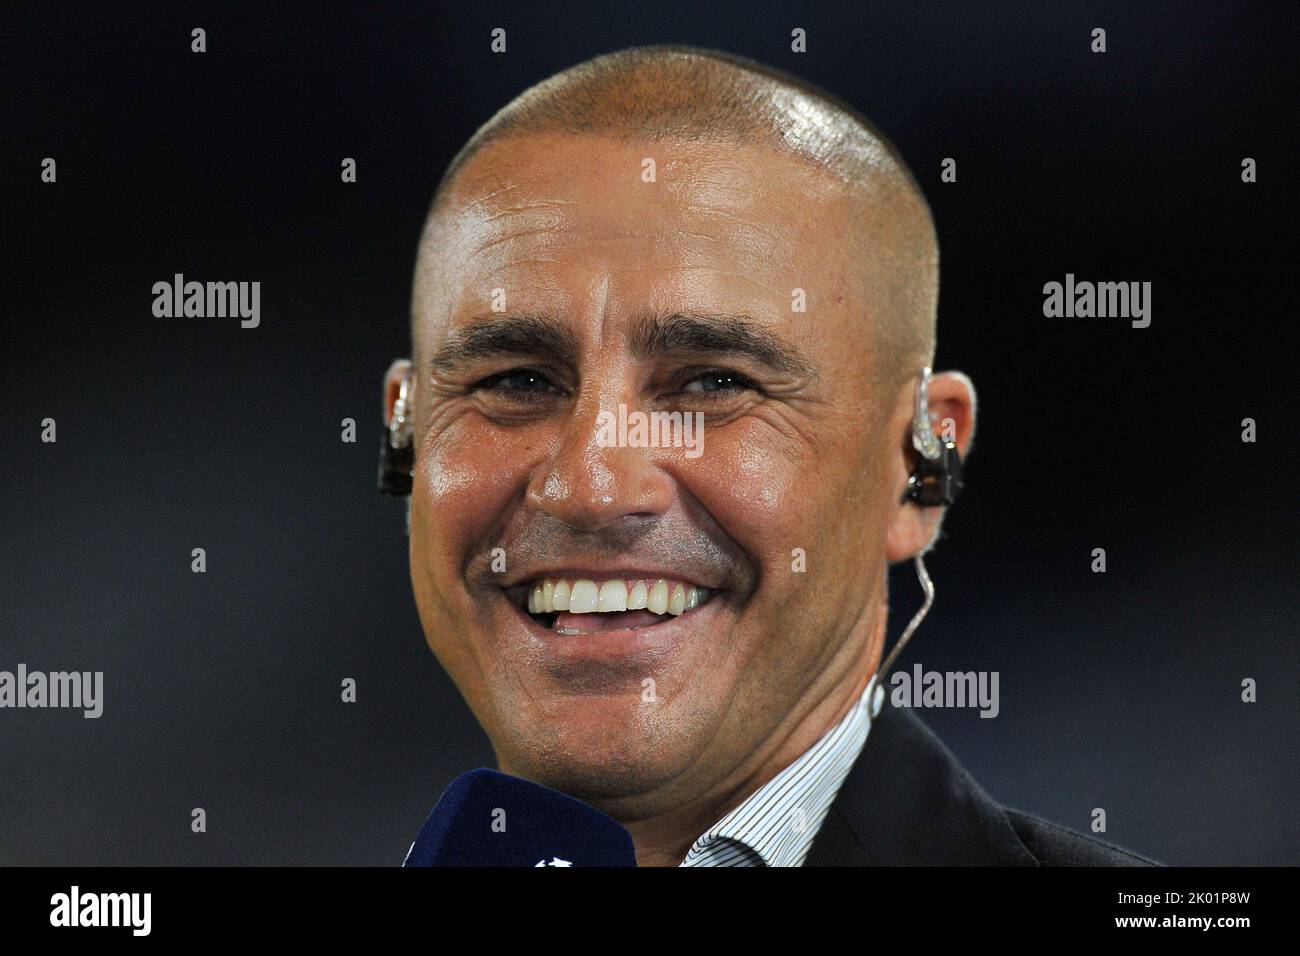 Fabio Cannavaro former footballer , during the match of the uefa champions league between Napoli vs Liverpool final result, Napoli 4, Liverpool 1, mat Stock Photo